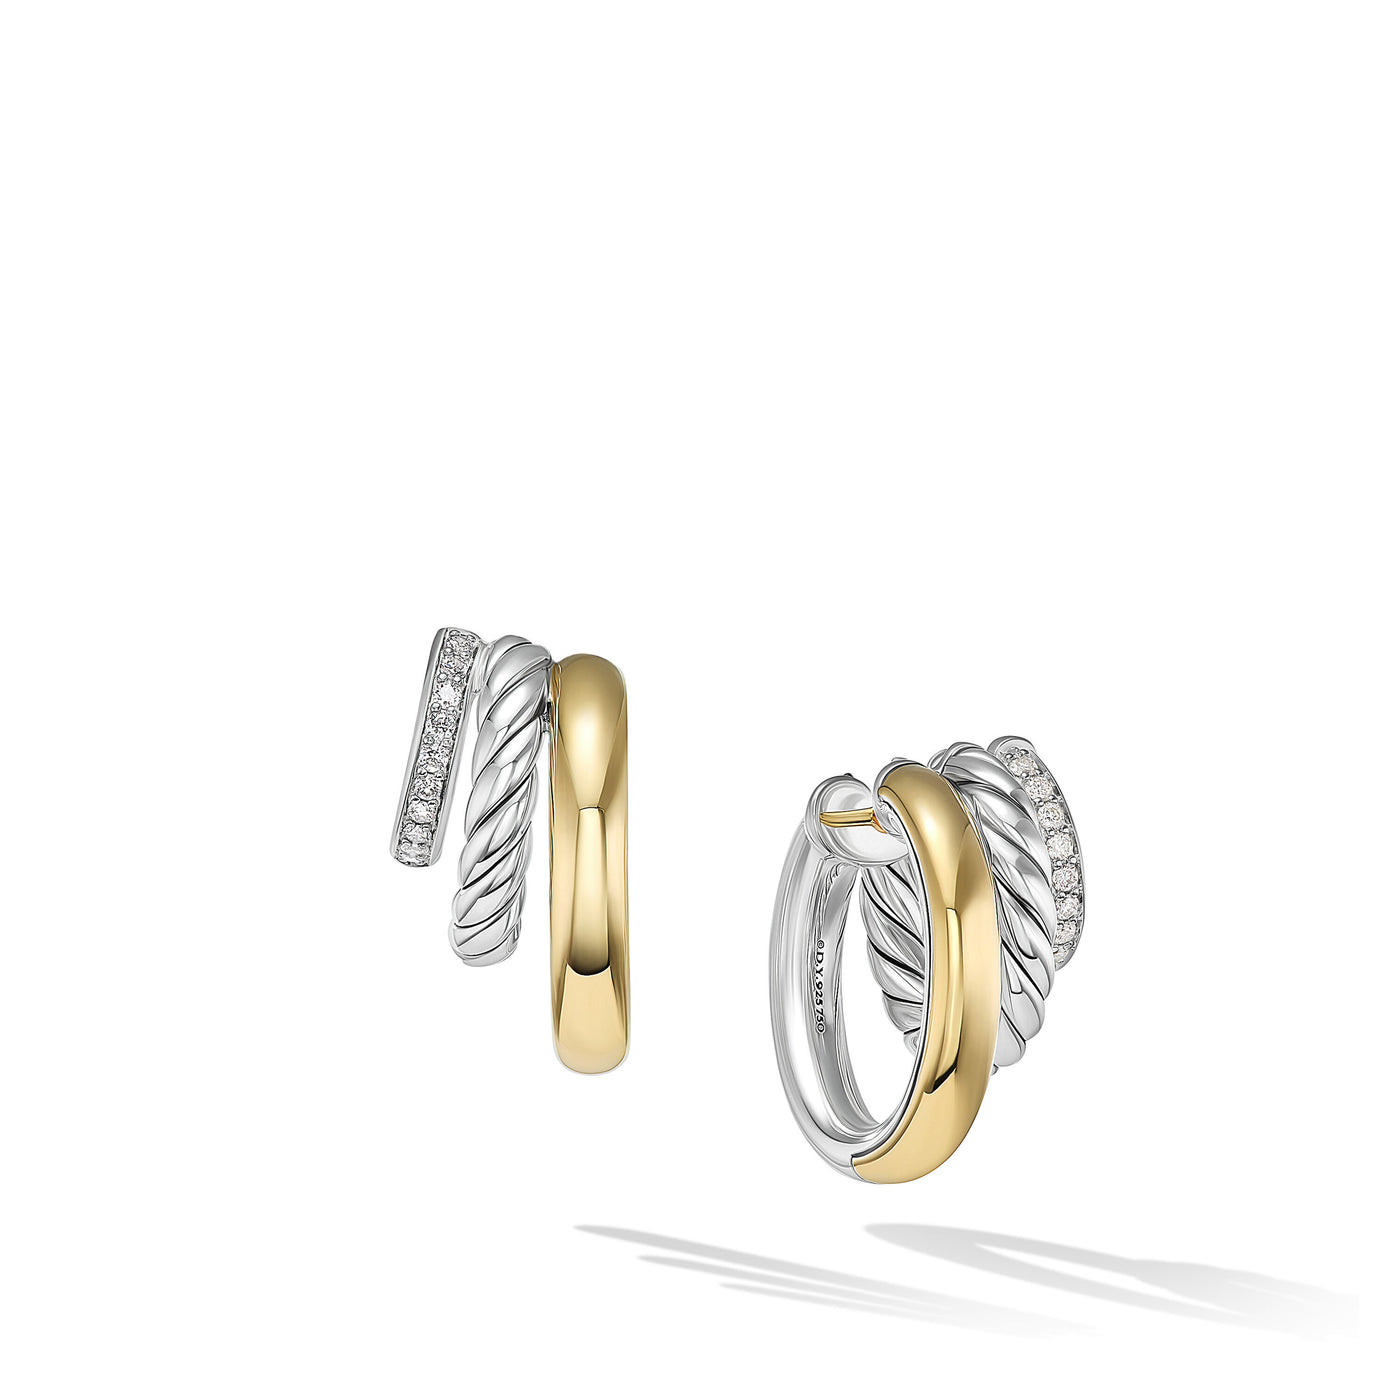 DY Mercer™ Multi Hoop Earrings in Sterling Silver with 18K Yellow Gold and Diamonds\, 21mm